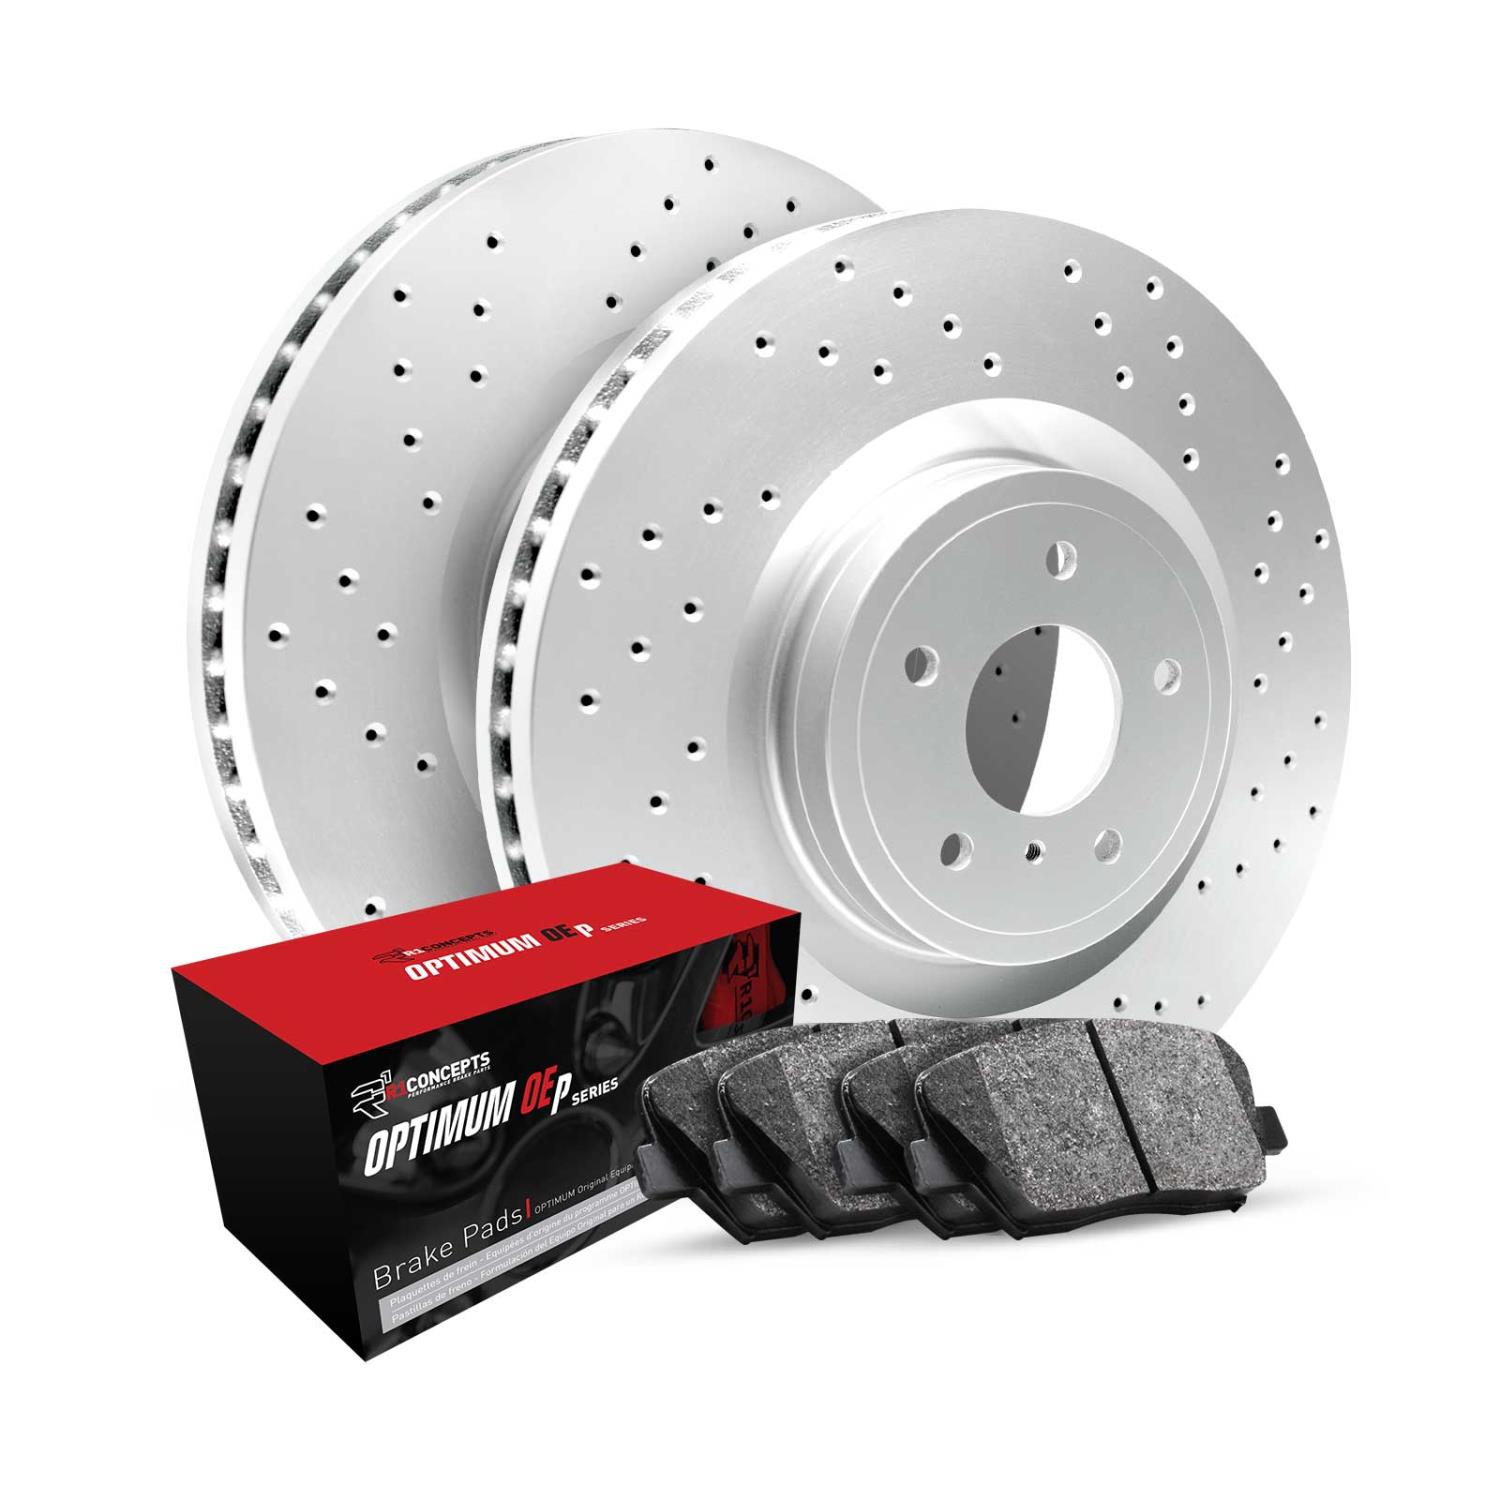 GEO-Carbon Drilled Brake Rotor Set w/Optimum OE Pads, 2000-2012 Fits Multiple Makes/Models, Position: Front